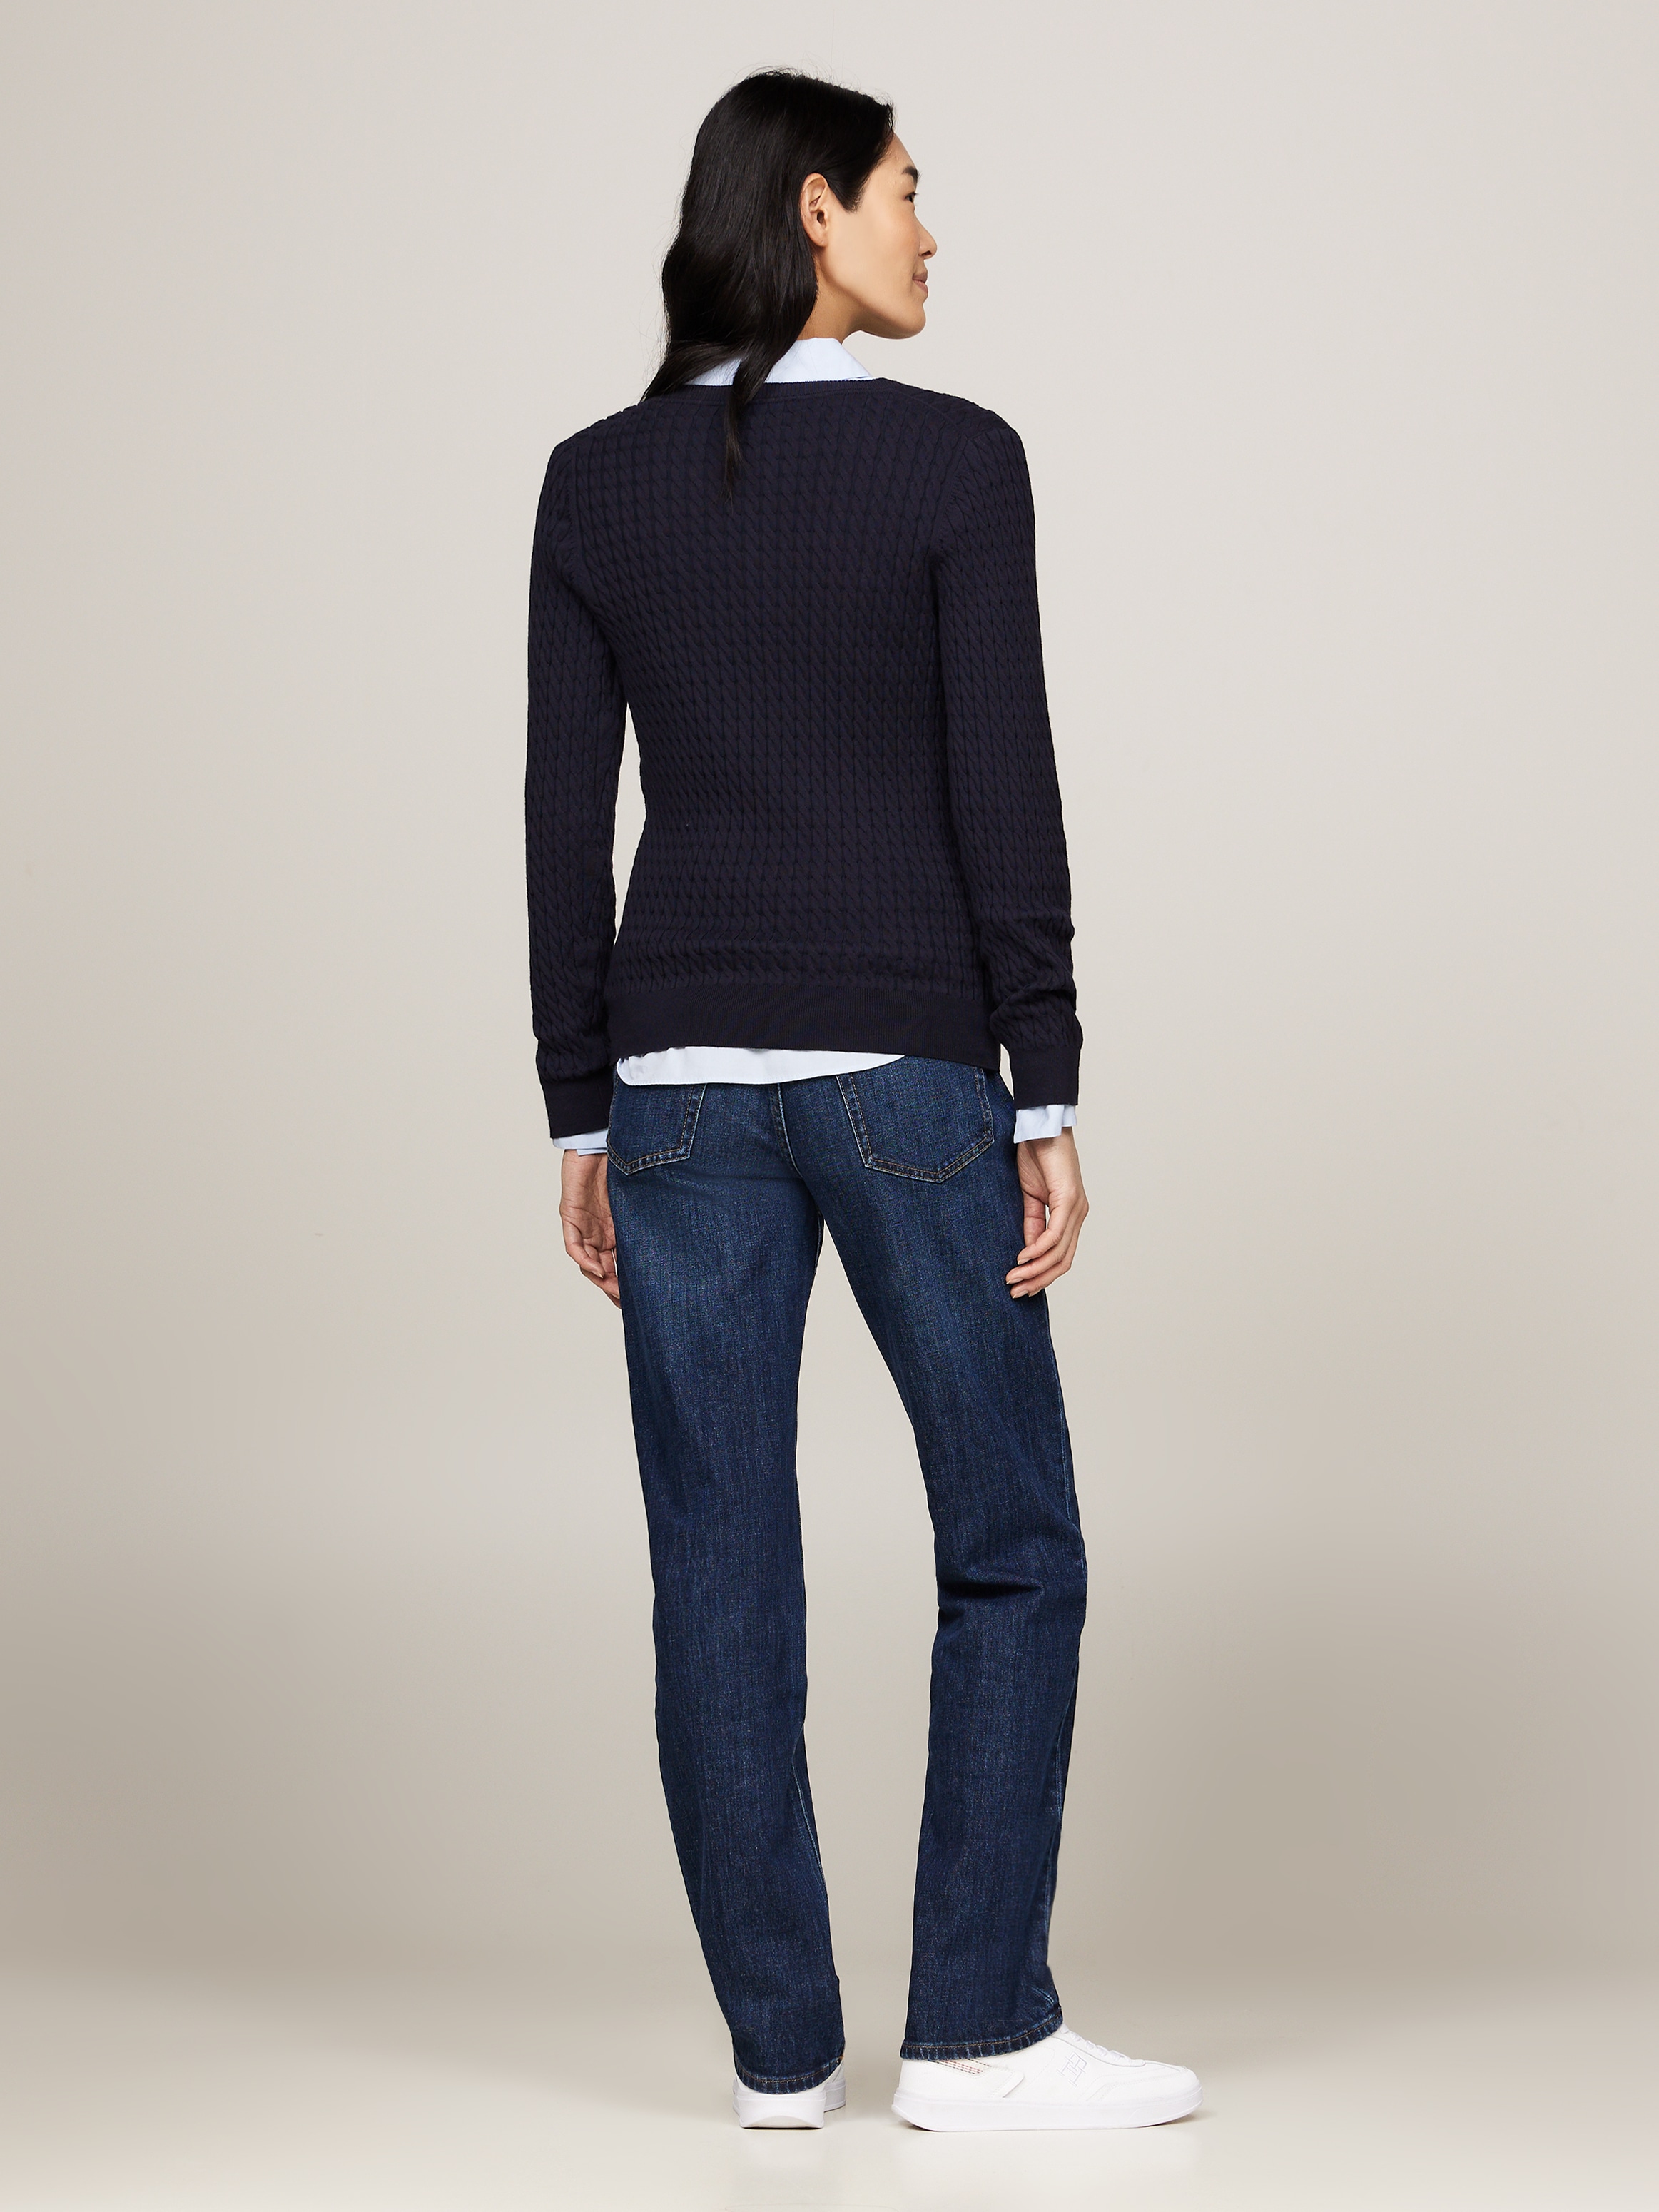 Tommy Hilfiger Strickpullover »CO CABLE V-NK SWEATER«, mit Zopfmuster